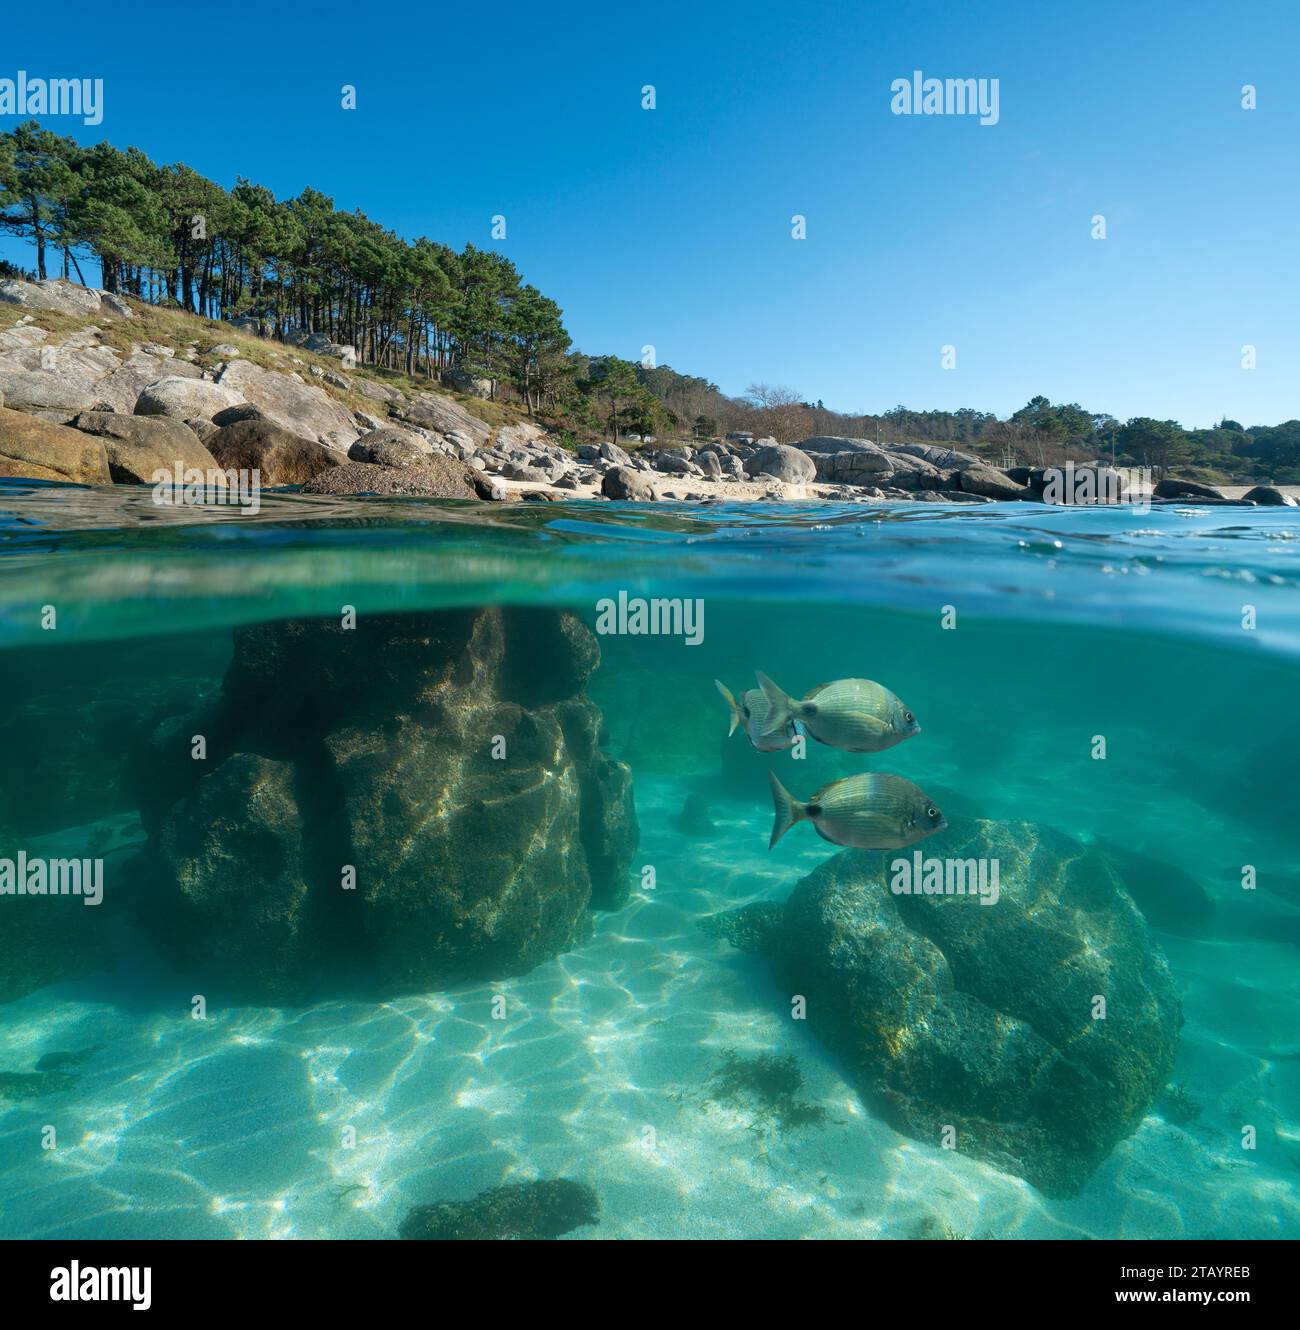 Atlantic ocean seascape, coastline with rocks and fish underwater, Spain, split view over and under water surface, natural scene, Galicia, Rias Baixas Stock Photo